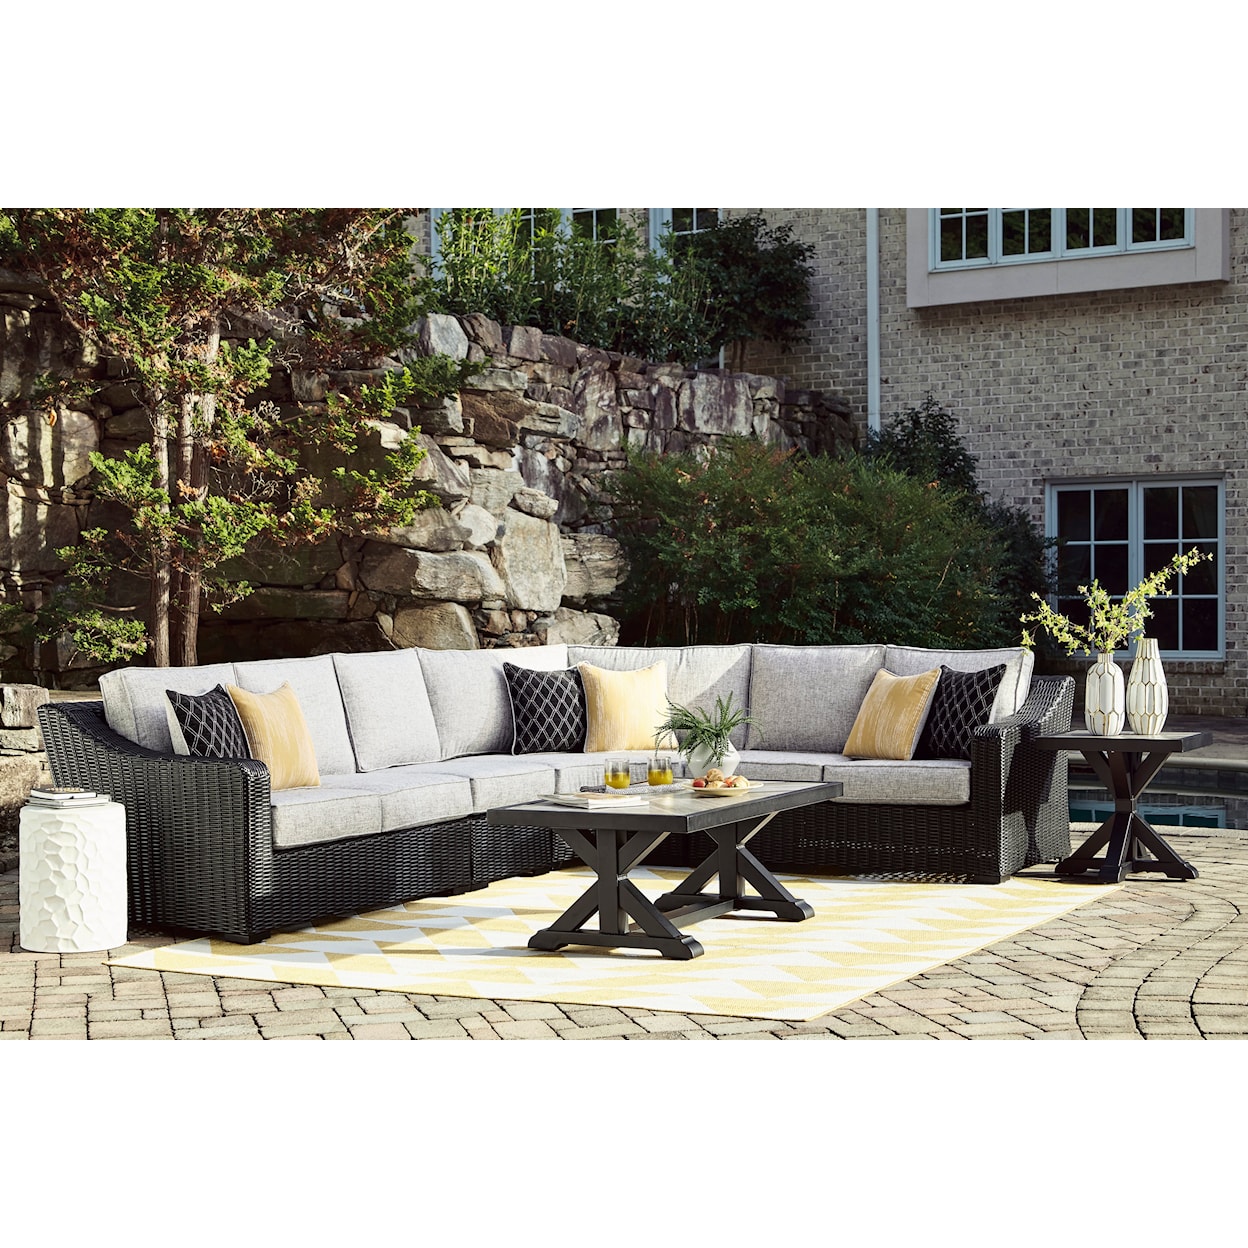 Signature Design by Ashley Beachcroft 4-Piece Outdoor Sectional